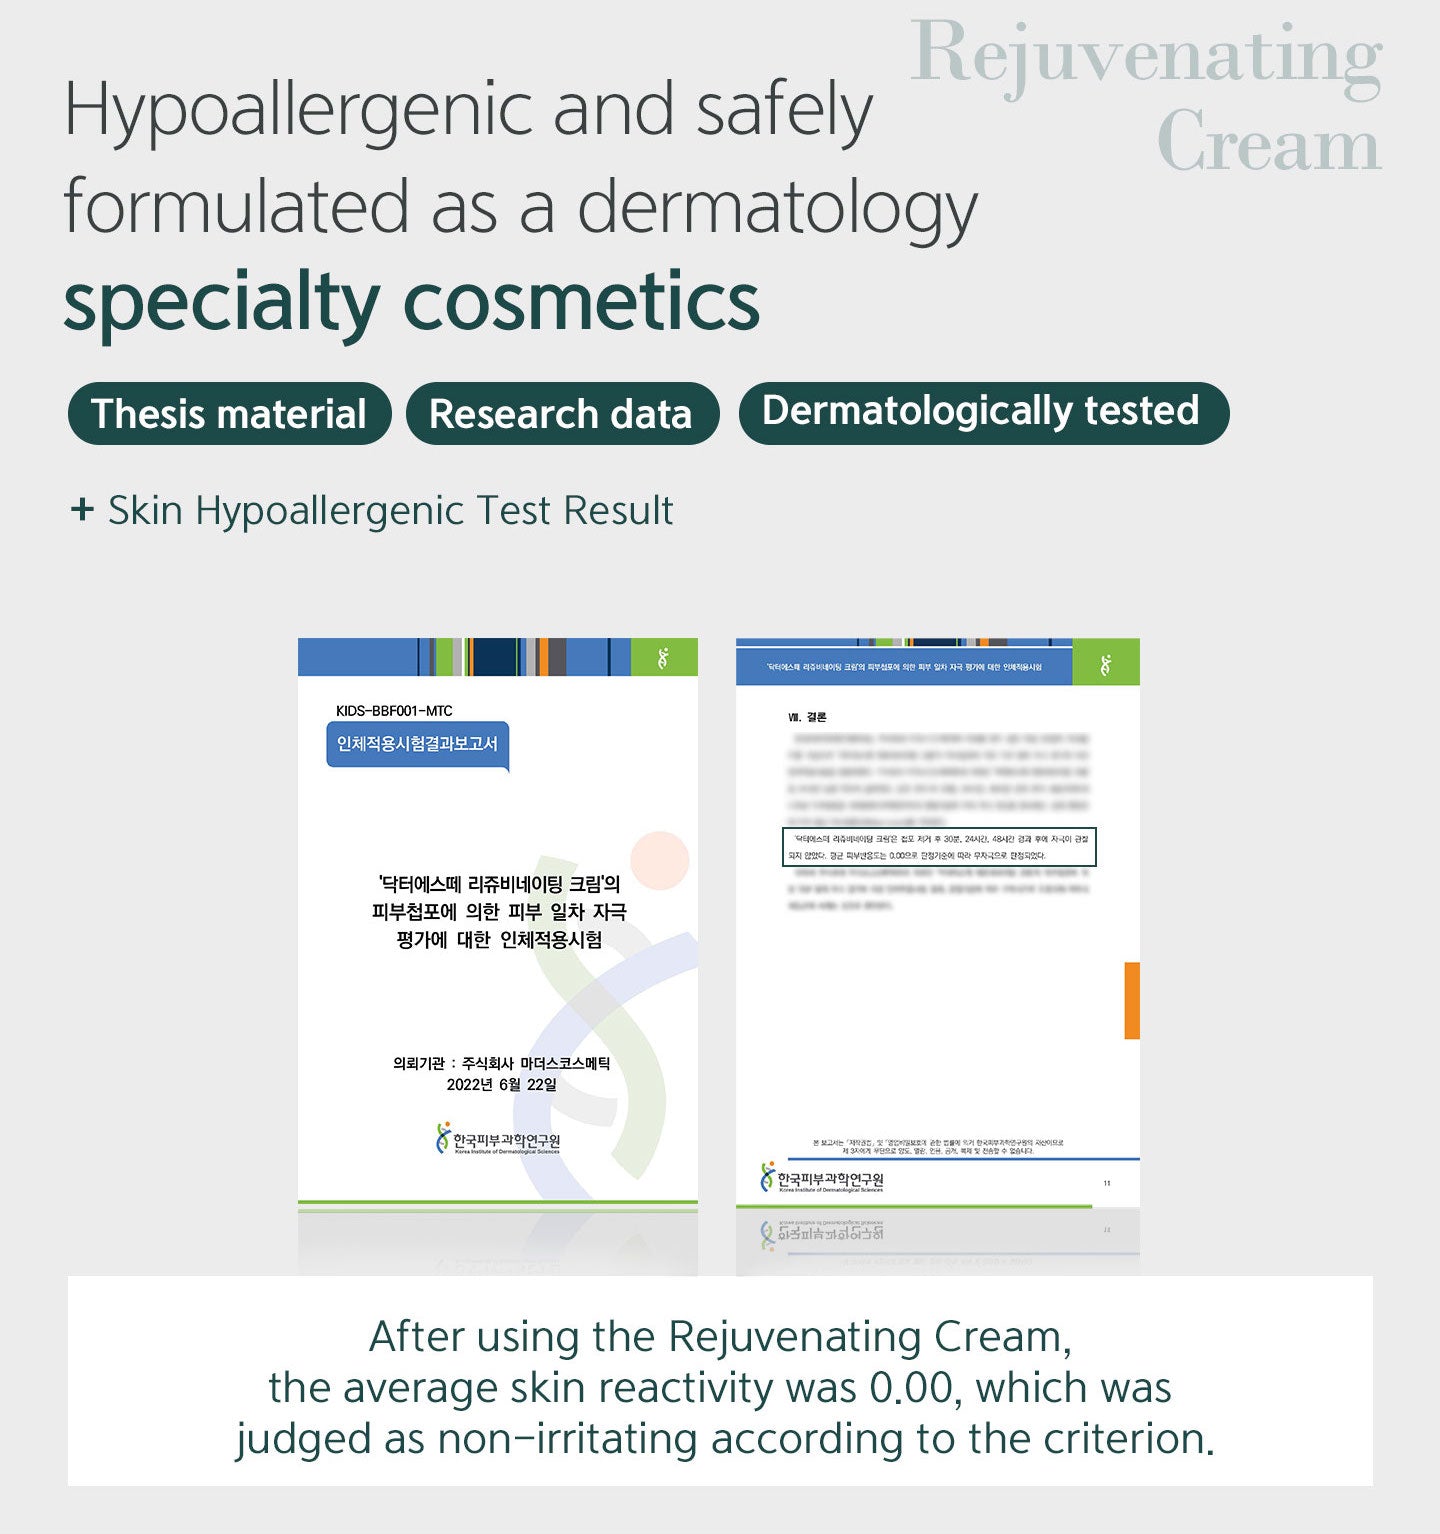 Hypoallergenic and safely formulated as a dermatology specialty cosmetics. After using the rejuvenating cream, the average skin reactivity was 0.00, which was judged as non-irritating according to the criterion. 